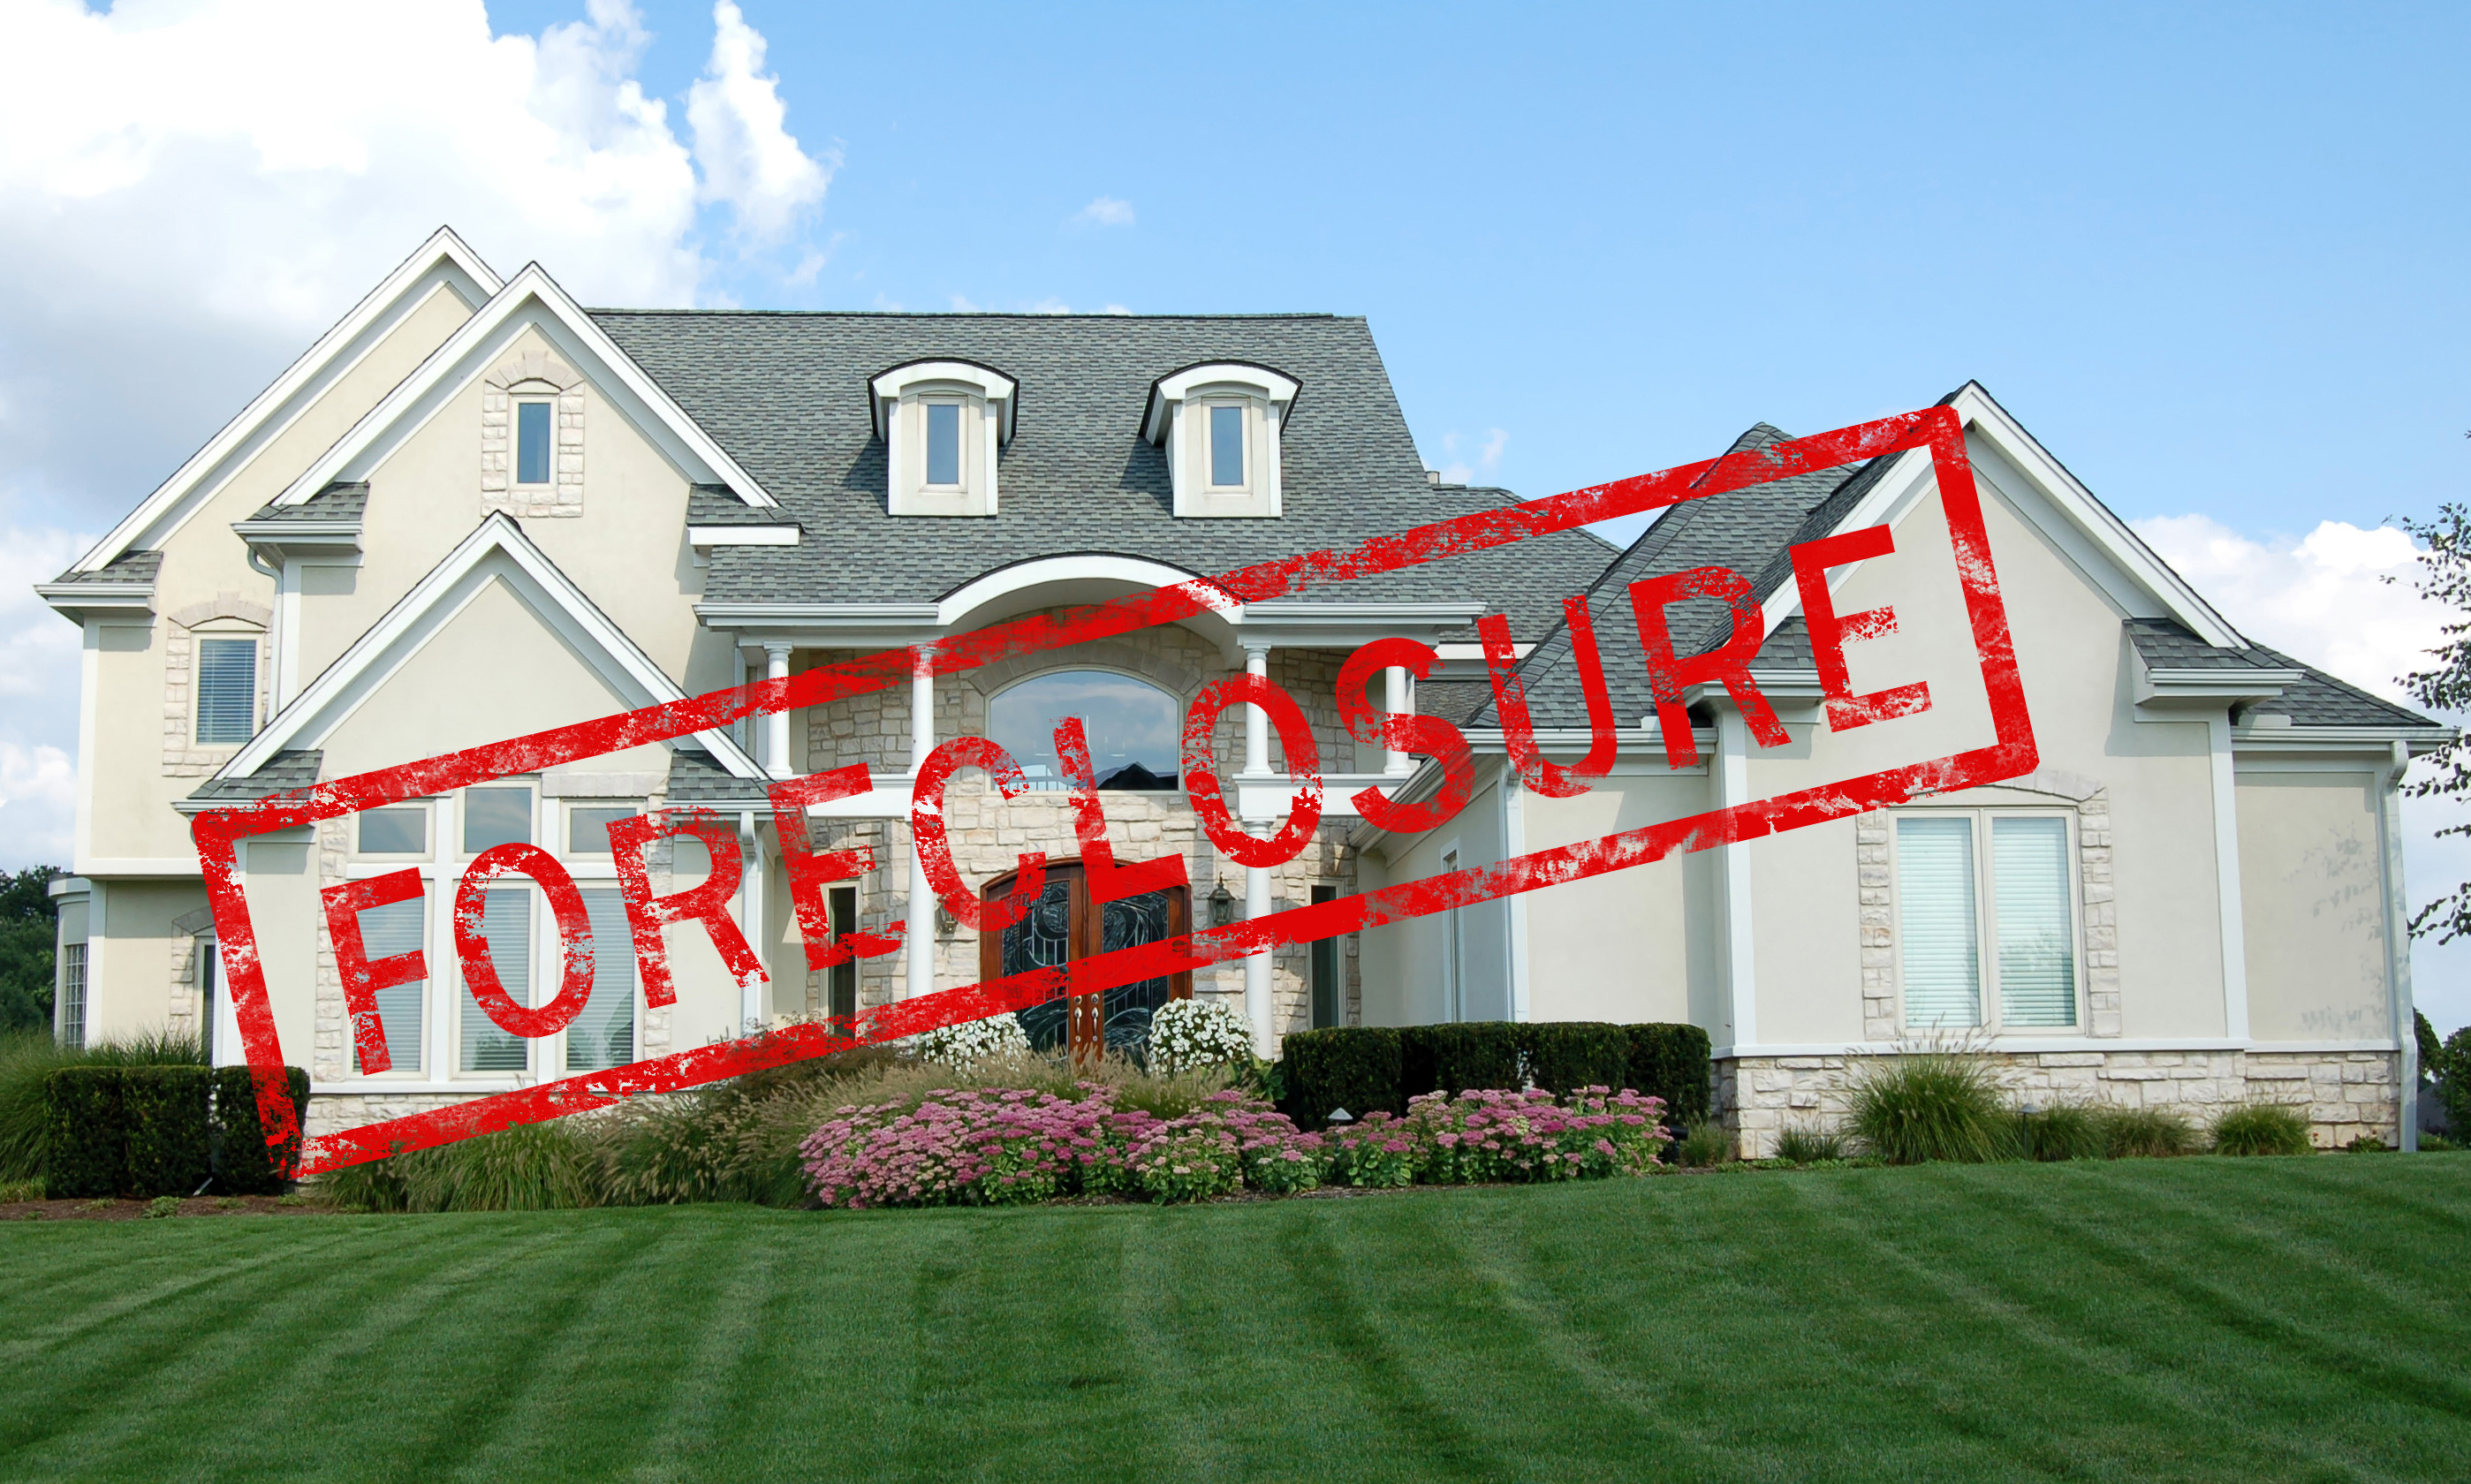 Call Tight & Right Real Estate Valuation when you need valuations on Union foreclosures